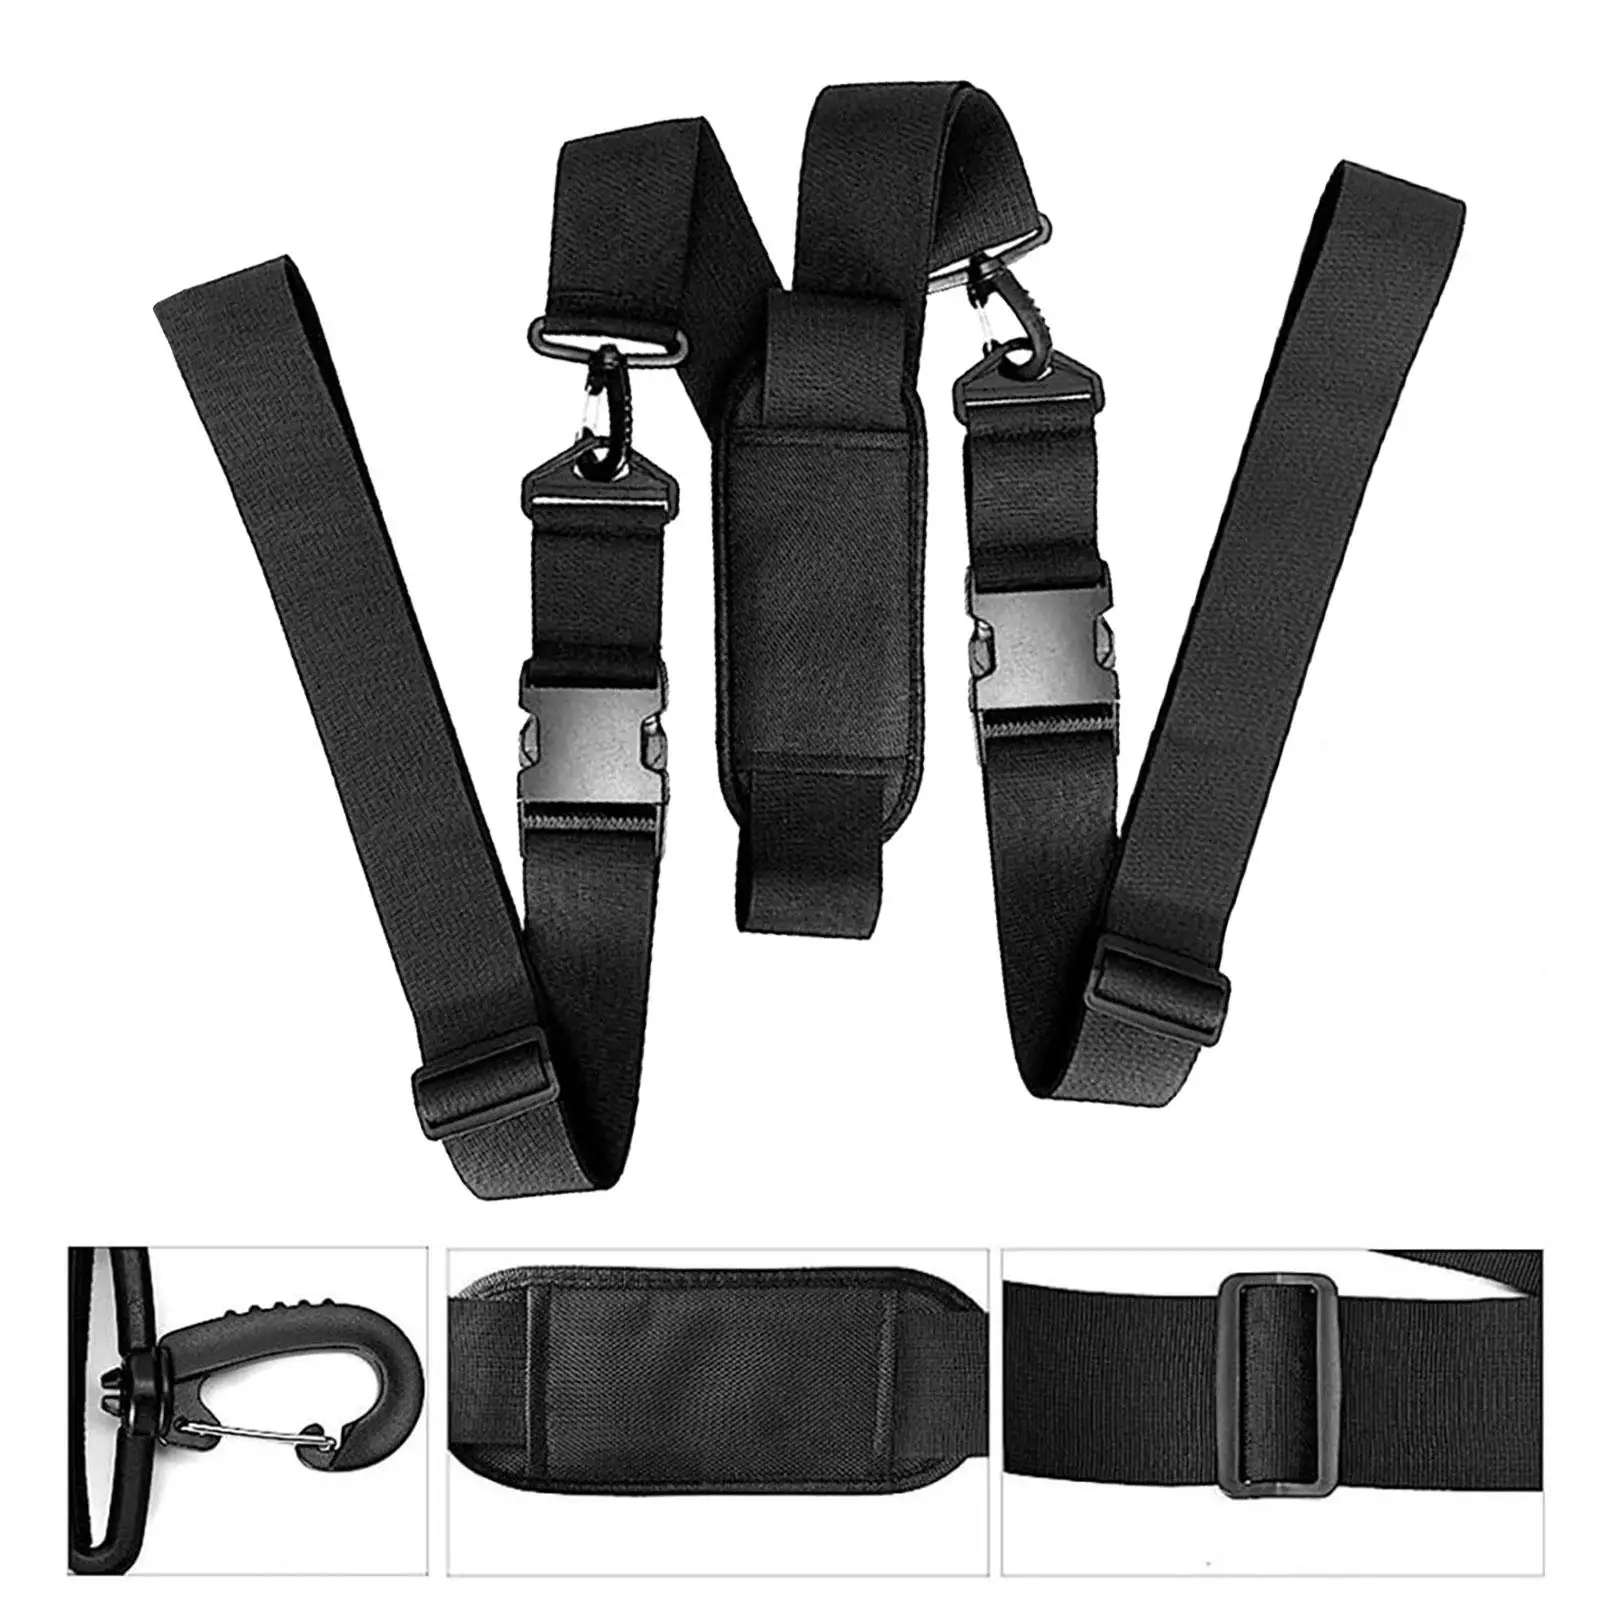 Paddleboard Carry Strap Multifunctional Kayak Carry Strap Carrying Sling for Canoe Wakeboard Longboard Short Board Surfboard